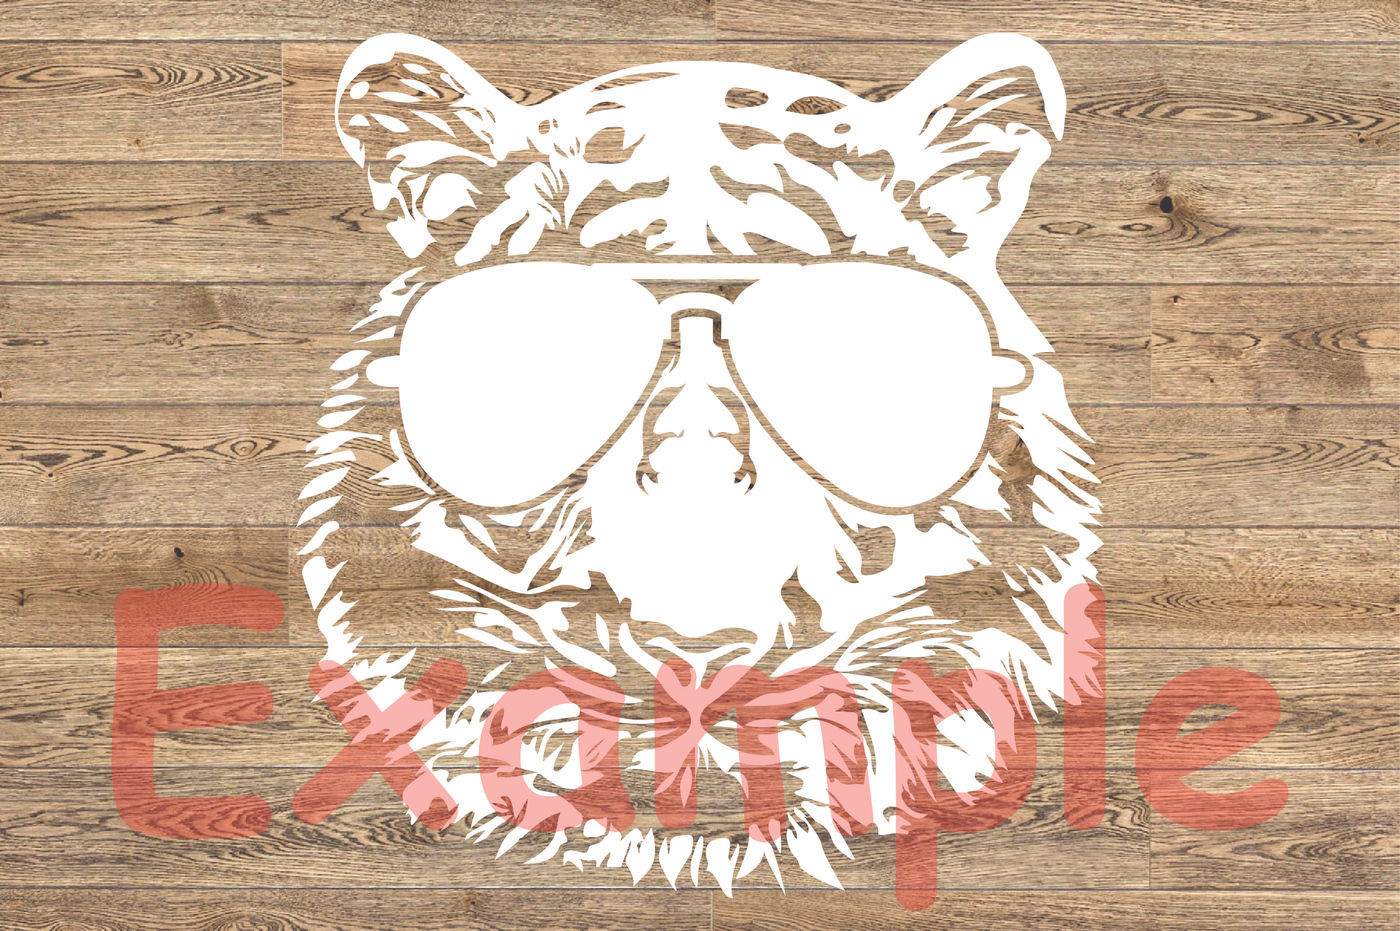 Download Wild Tiger Head Whit Glasses Svg African Tigers Zoo Football 928s By Hamhamart Thehungryjpeg Com PSD Mockup Templates